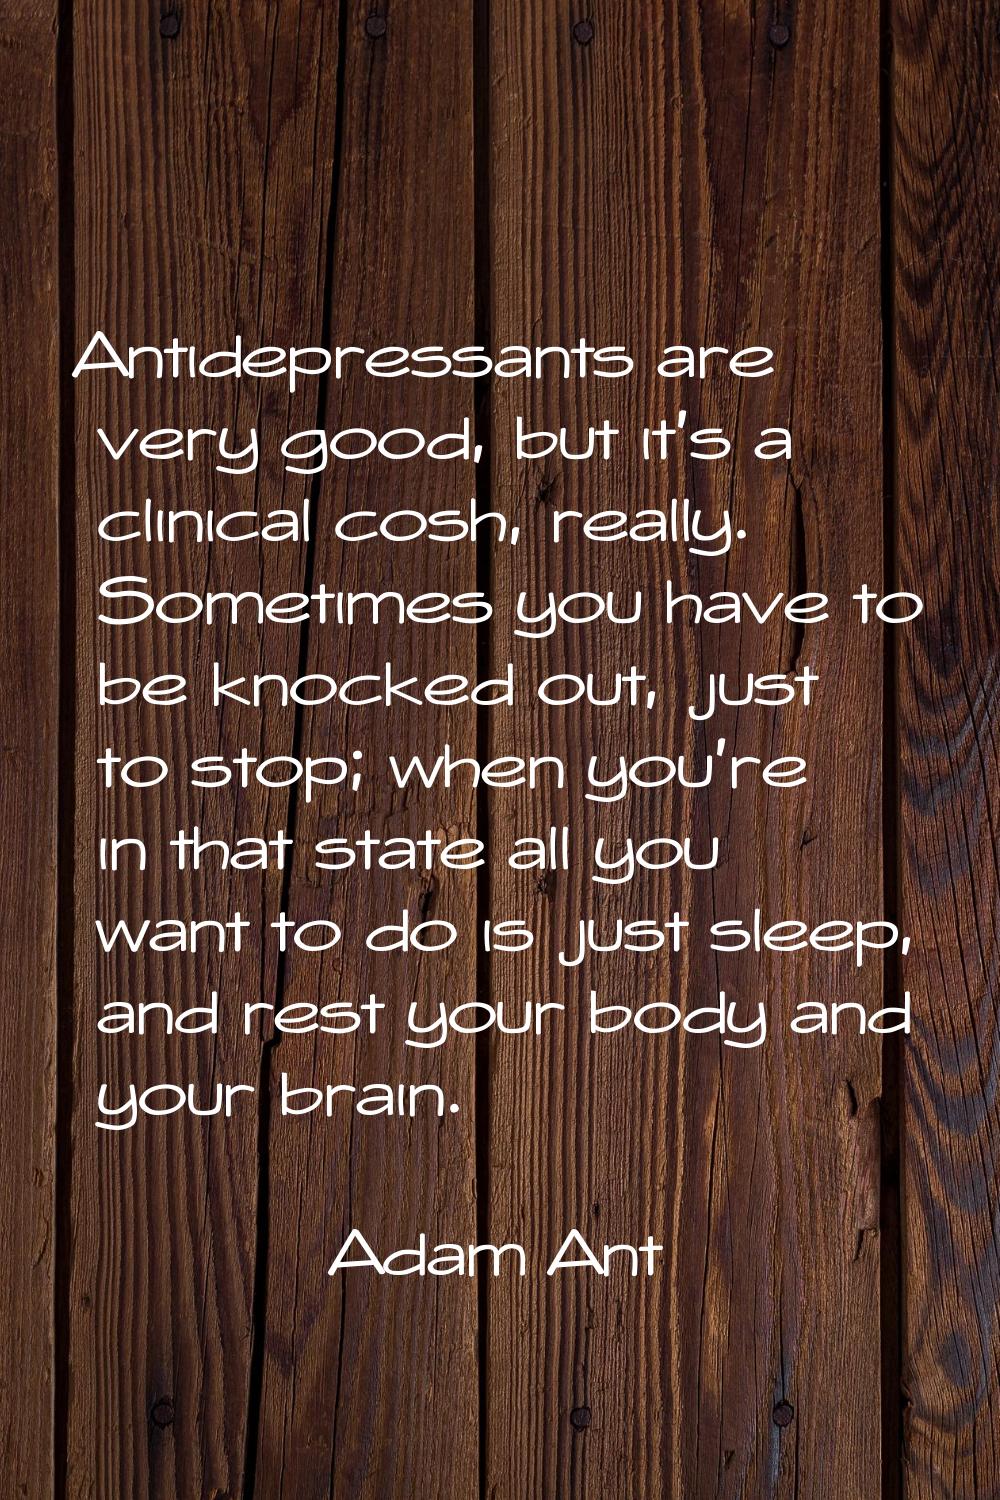 Antidepressants are very good, but it's a clinical cosh, really. Sometimes you have to be knocked o